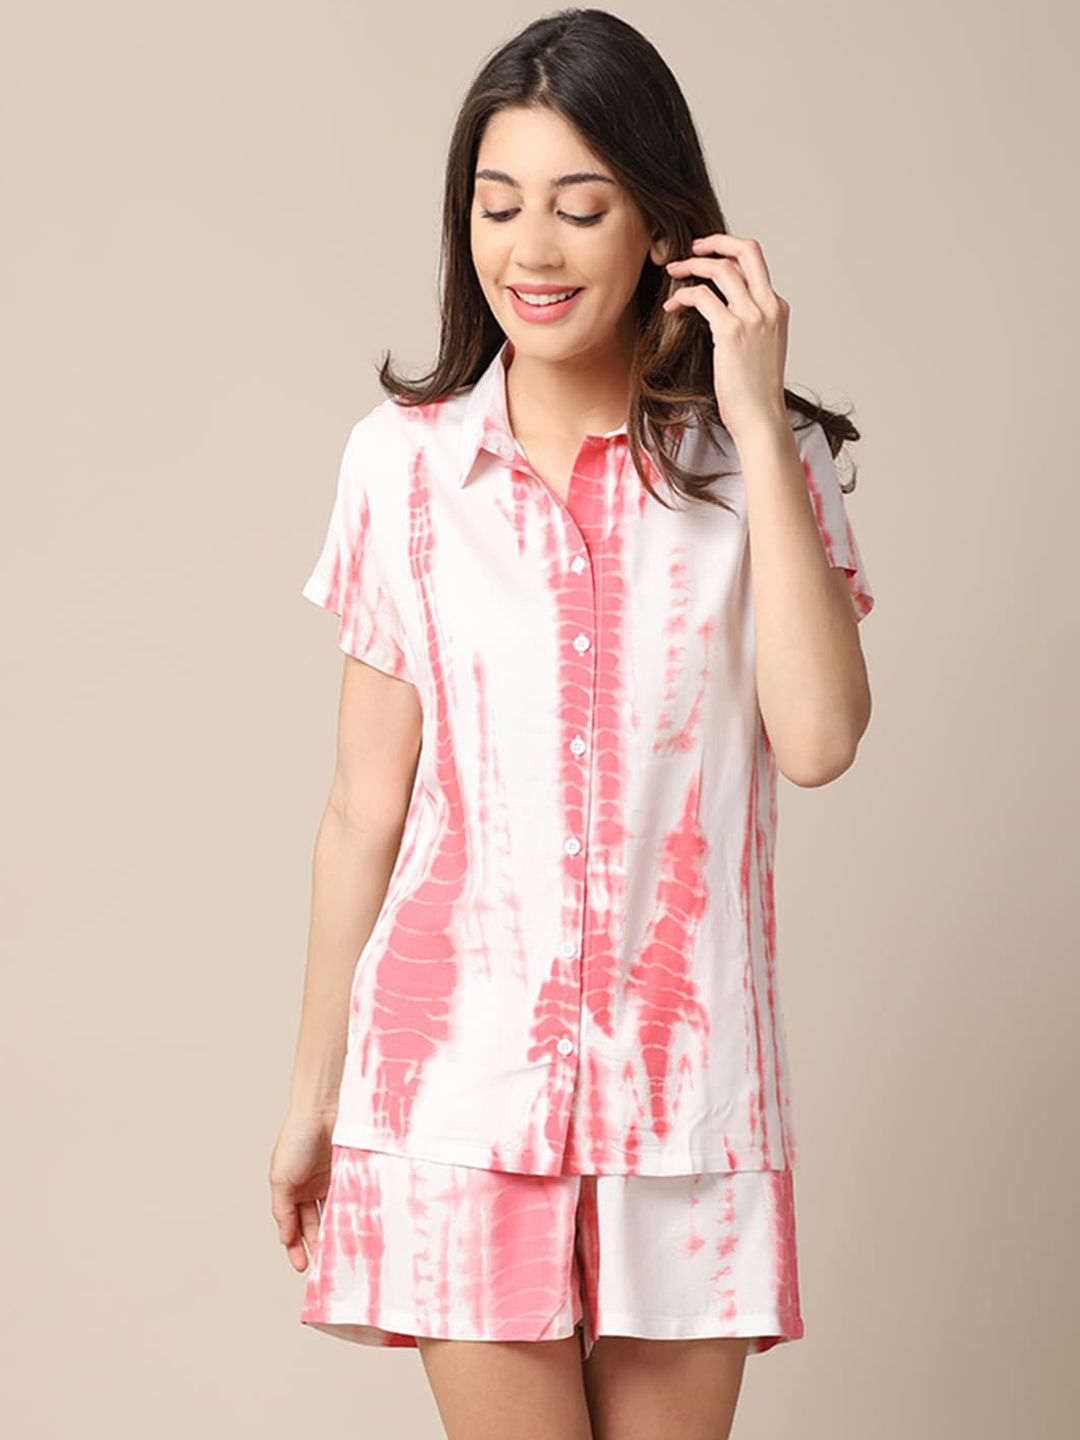 Claura Women Pink & White Printed Night suit Price in India